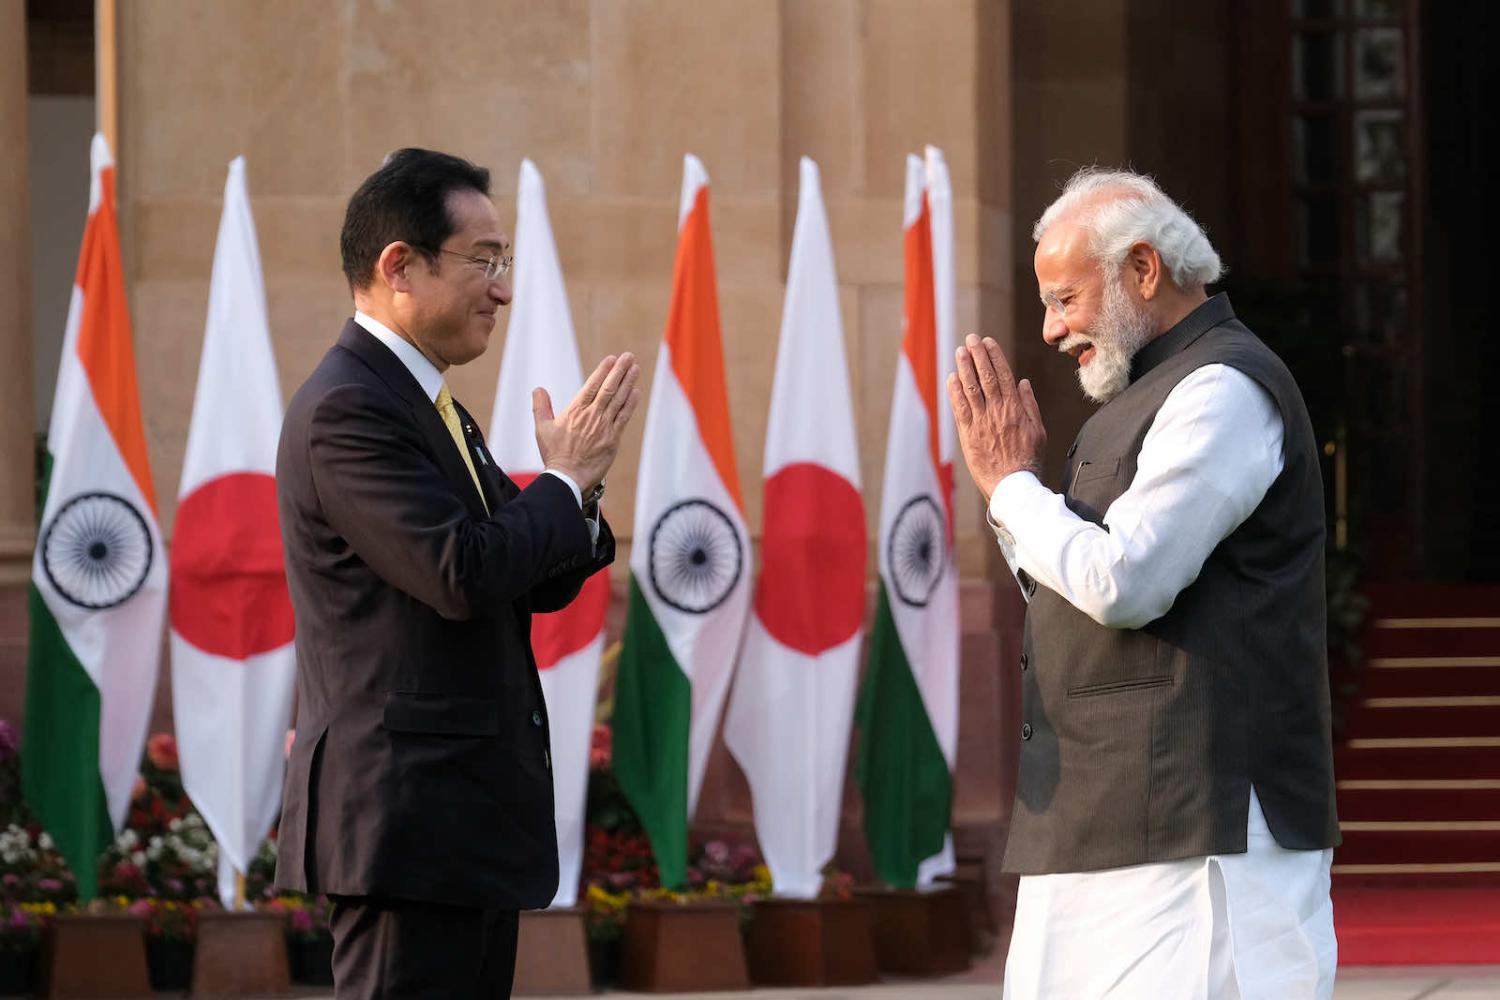 Japan's prime minister Kishida Fumio at Hyderabad House in New Delhi with Narendra Modi last month (T. Narayan/Bloomberg via Getty Images)